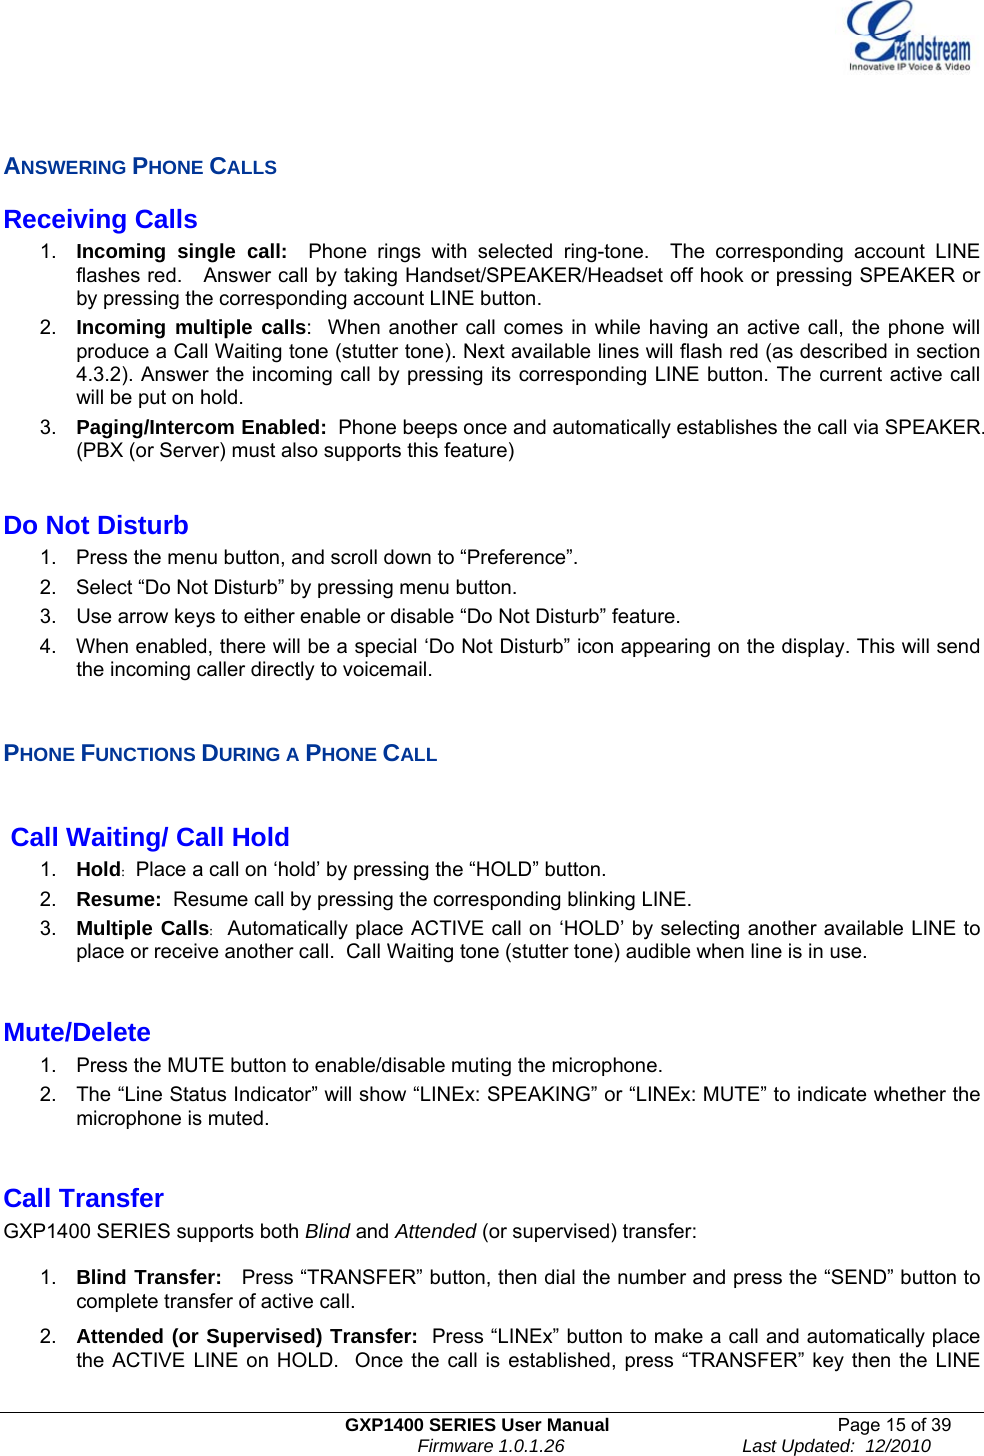   GXP1400 SERIES User Manual  Page 15 of 39                                                                          Firmware 1.0.1.26                                   Last Updated:  12/2010   ANSWERING PHONE CALLS Receiving Calls 1.  Incoming single call:  Phone rings with selected ring-tone.  The corresponding account LINE flashes red.   Answer call by taking Handset/SPEAKER/Headset off hook or pressing SPEAKER or by pressing the corresponding account LINE button.   2.  Incoming multiple calls:  When another call comes in while having an active call, the phone will produce a Call Waiting tone (stutter tone). Next available lines will flash red (as described in section 4.3.2). Answer the incoming call by pressing its corresponding LINE button. The current active call will be put on hold.  3.  Paging/Intercom Enabled:  Phone beeps once and automatically establishes the call via SPEAKER.  (PBX (or Server) must also supports this feature)  Do Not Disturb 1.  Press the menu button, and scroll down to “Preference”. 2.  Select “Do Not Disturb” by pressing menu button. 3.  Use arrow keys to either enable or disable “Do Not Disturb” feature.   4.  When enabled, there will be a special ‘Do Not Disturb” icon appearing on the display. This will send the incoming caller directly to voicemail.    PHONE FUNCTIONS DURING A PHONE CALL   Call Waiting/ Call Hold 1.  Hold:  Place a call on ‘hold’ by pressing the “HOLD” button.  2.  Resume:  Resume call by pressing the corresponding blinking LINE.  3.  Multiple Calls:  Automatically place ACTIVE call on ‘HOLD’ by selecting another available LINE to place or receive another call.  Call Waiting tone (stutter tone) audible when line is in use.  Mute/Delete 1.  Press the MUTE button to enable/disable muting the microphone.  2.  The “Line Status Indicator” will show “LINEx: SPEAKING” or “LINEx: MUTE” to indicate whether the microphone is muted.  Call Transfer   GXP1400 SERIES supports both Blind and Attended (or supervised) transfer:  1.  Blind Transfer:   Press “TRANSFER” button, then dial the number and press the “SEND” button to complete transfer of active call.   2.  Attended (or Supervised) Transfer:  Press “LINEx” button to make a call and automatically place the ACTIVE LINE on HOLD.  Once the call is established, press “TRANSFER” key then the LINE 